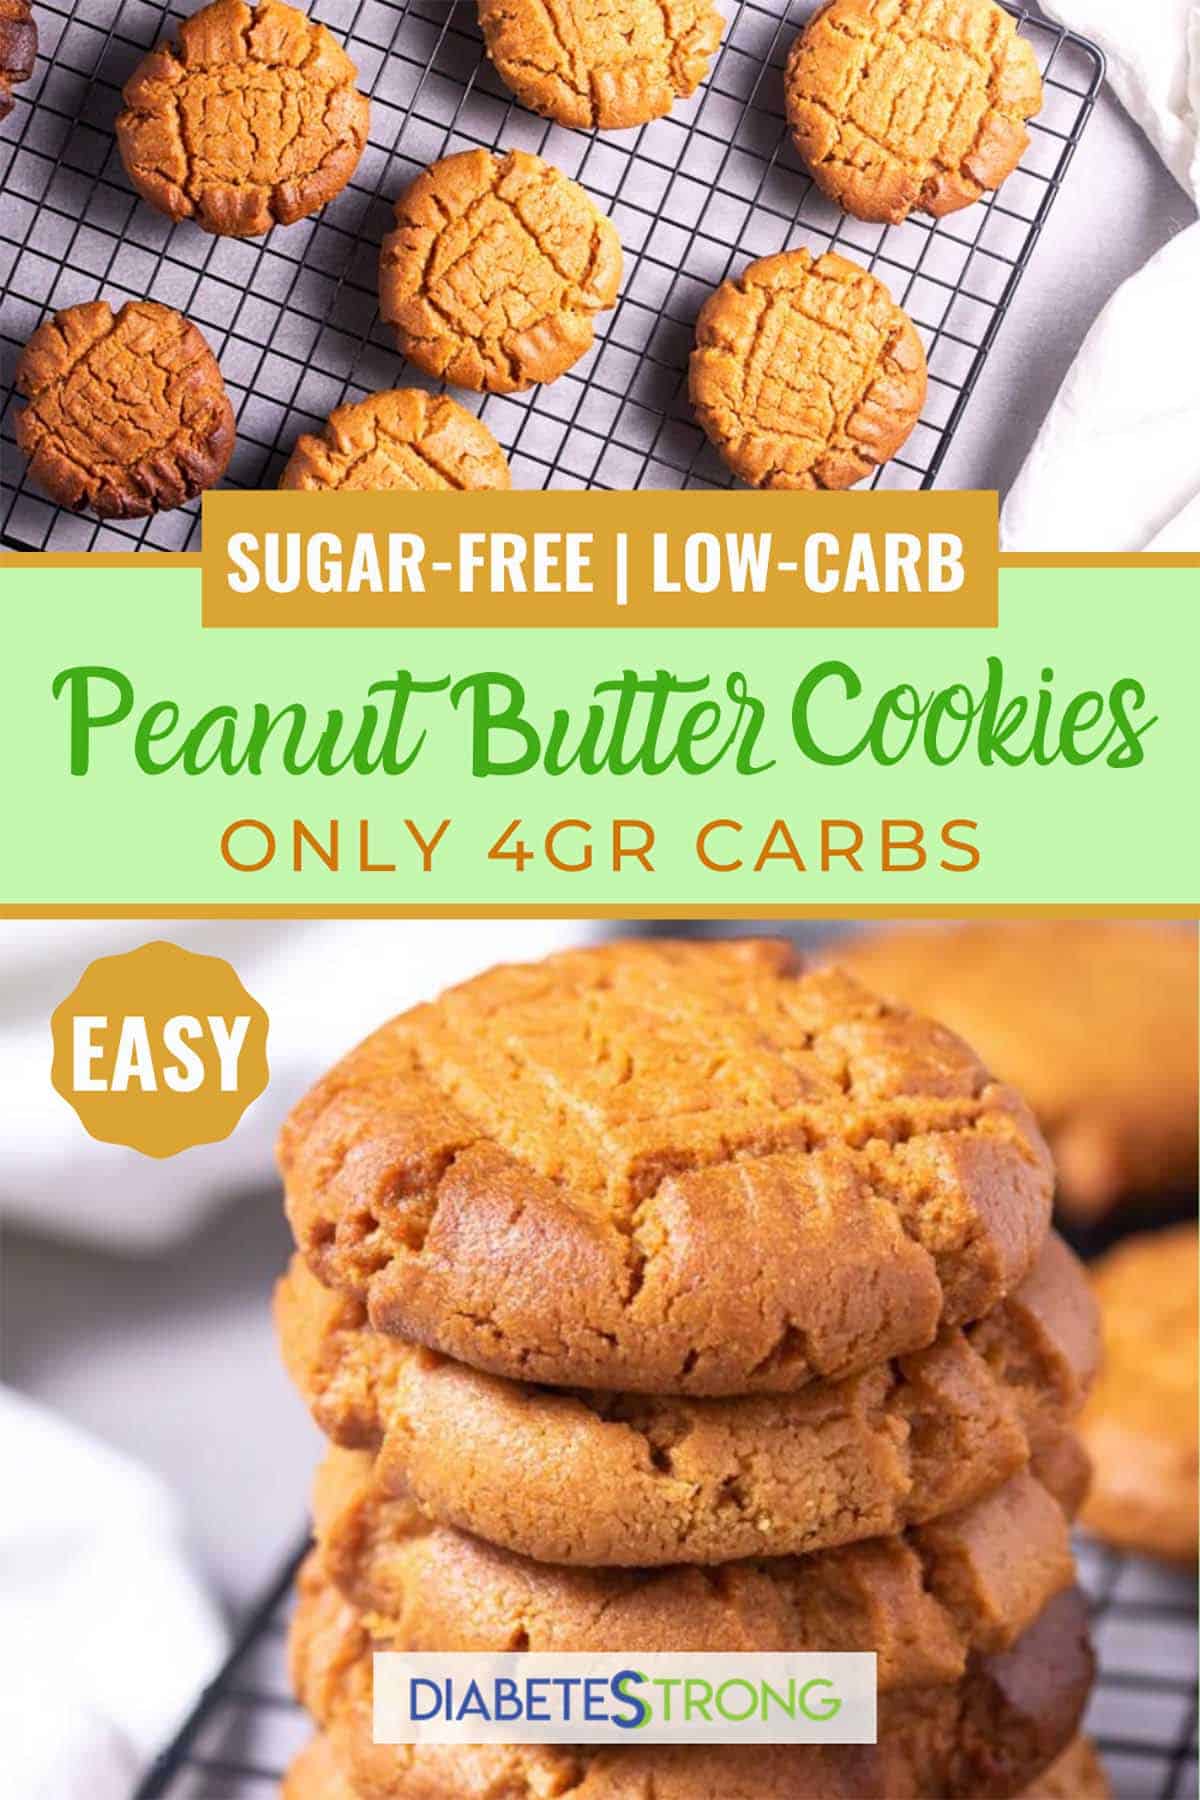 Low-Carb Peanut Butter Cookies (Sugar-Free) - Diabetes Strong